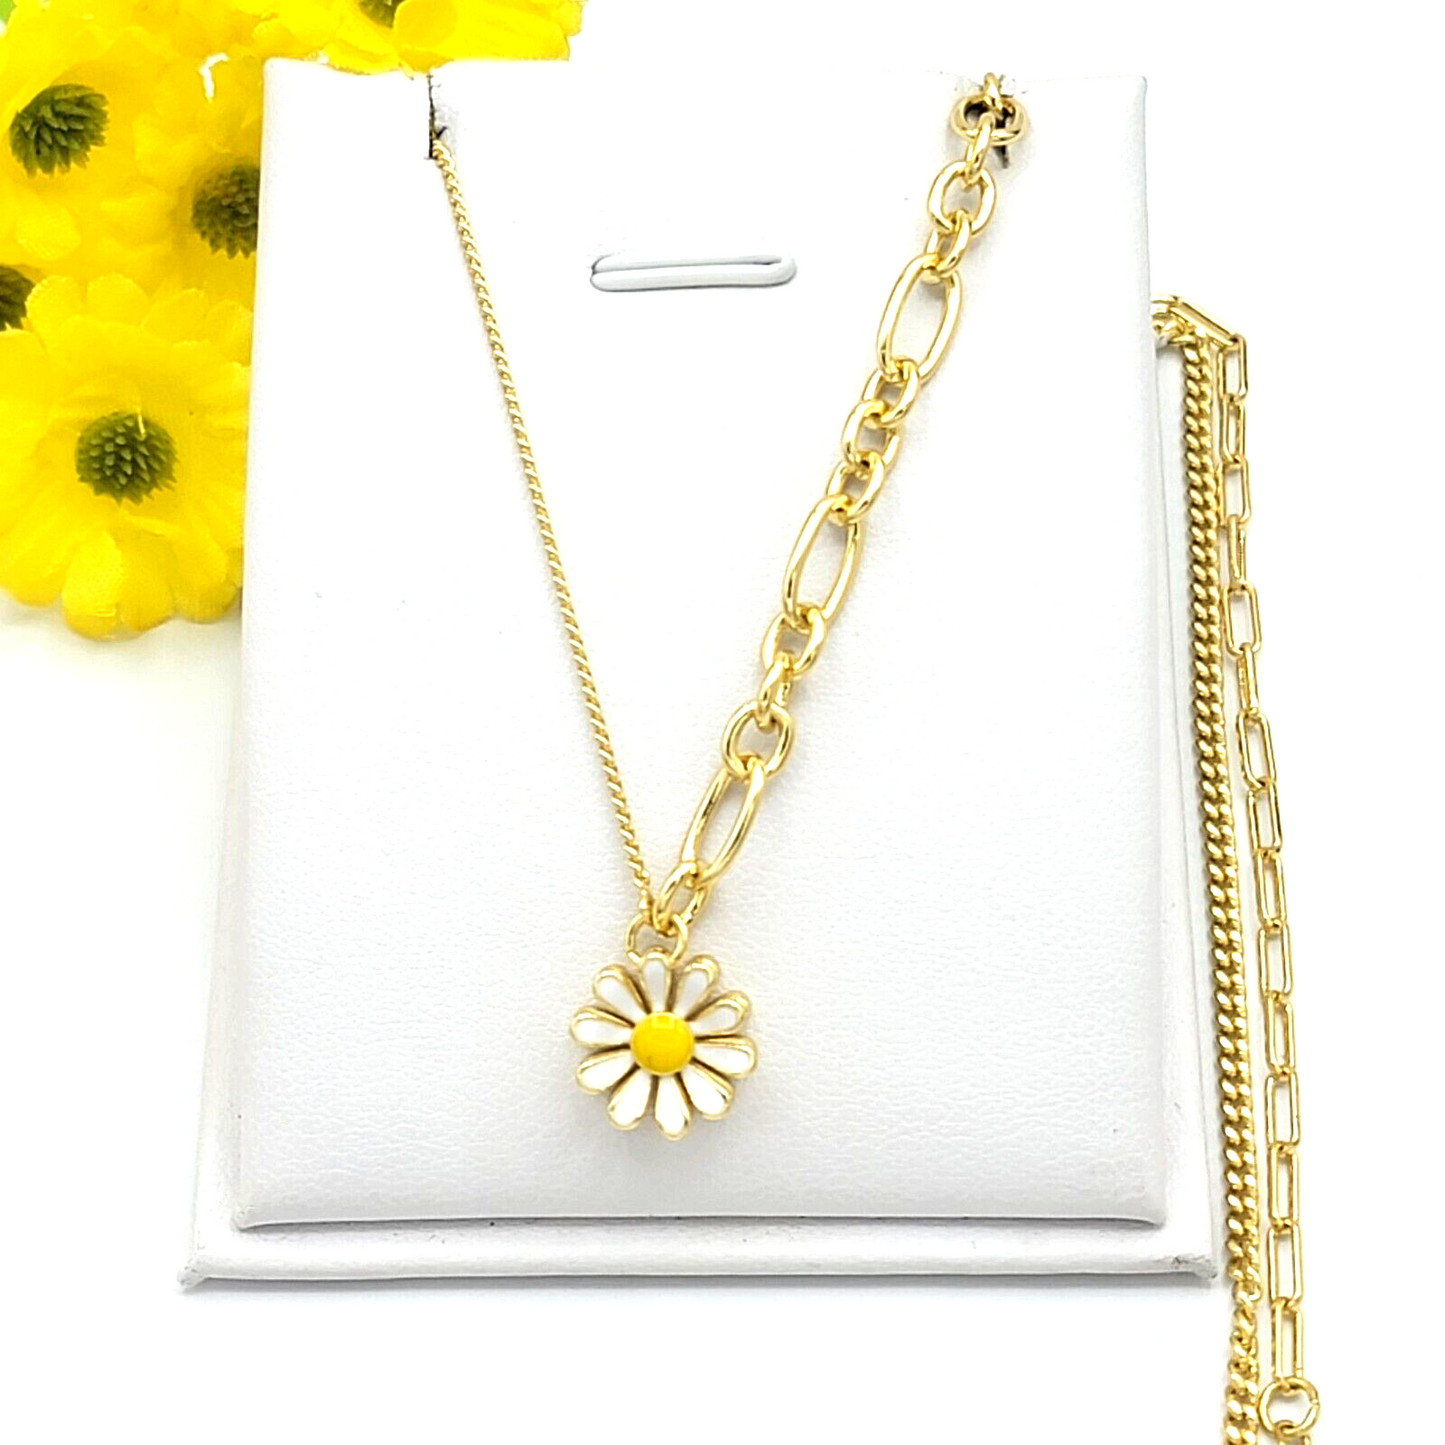 Necklaces - 14K Gold Plated. White Daisy Flower Charm Pendant Fancy Chain Necklace